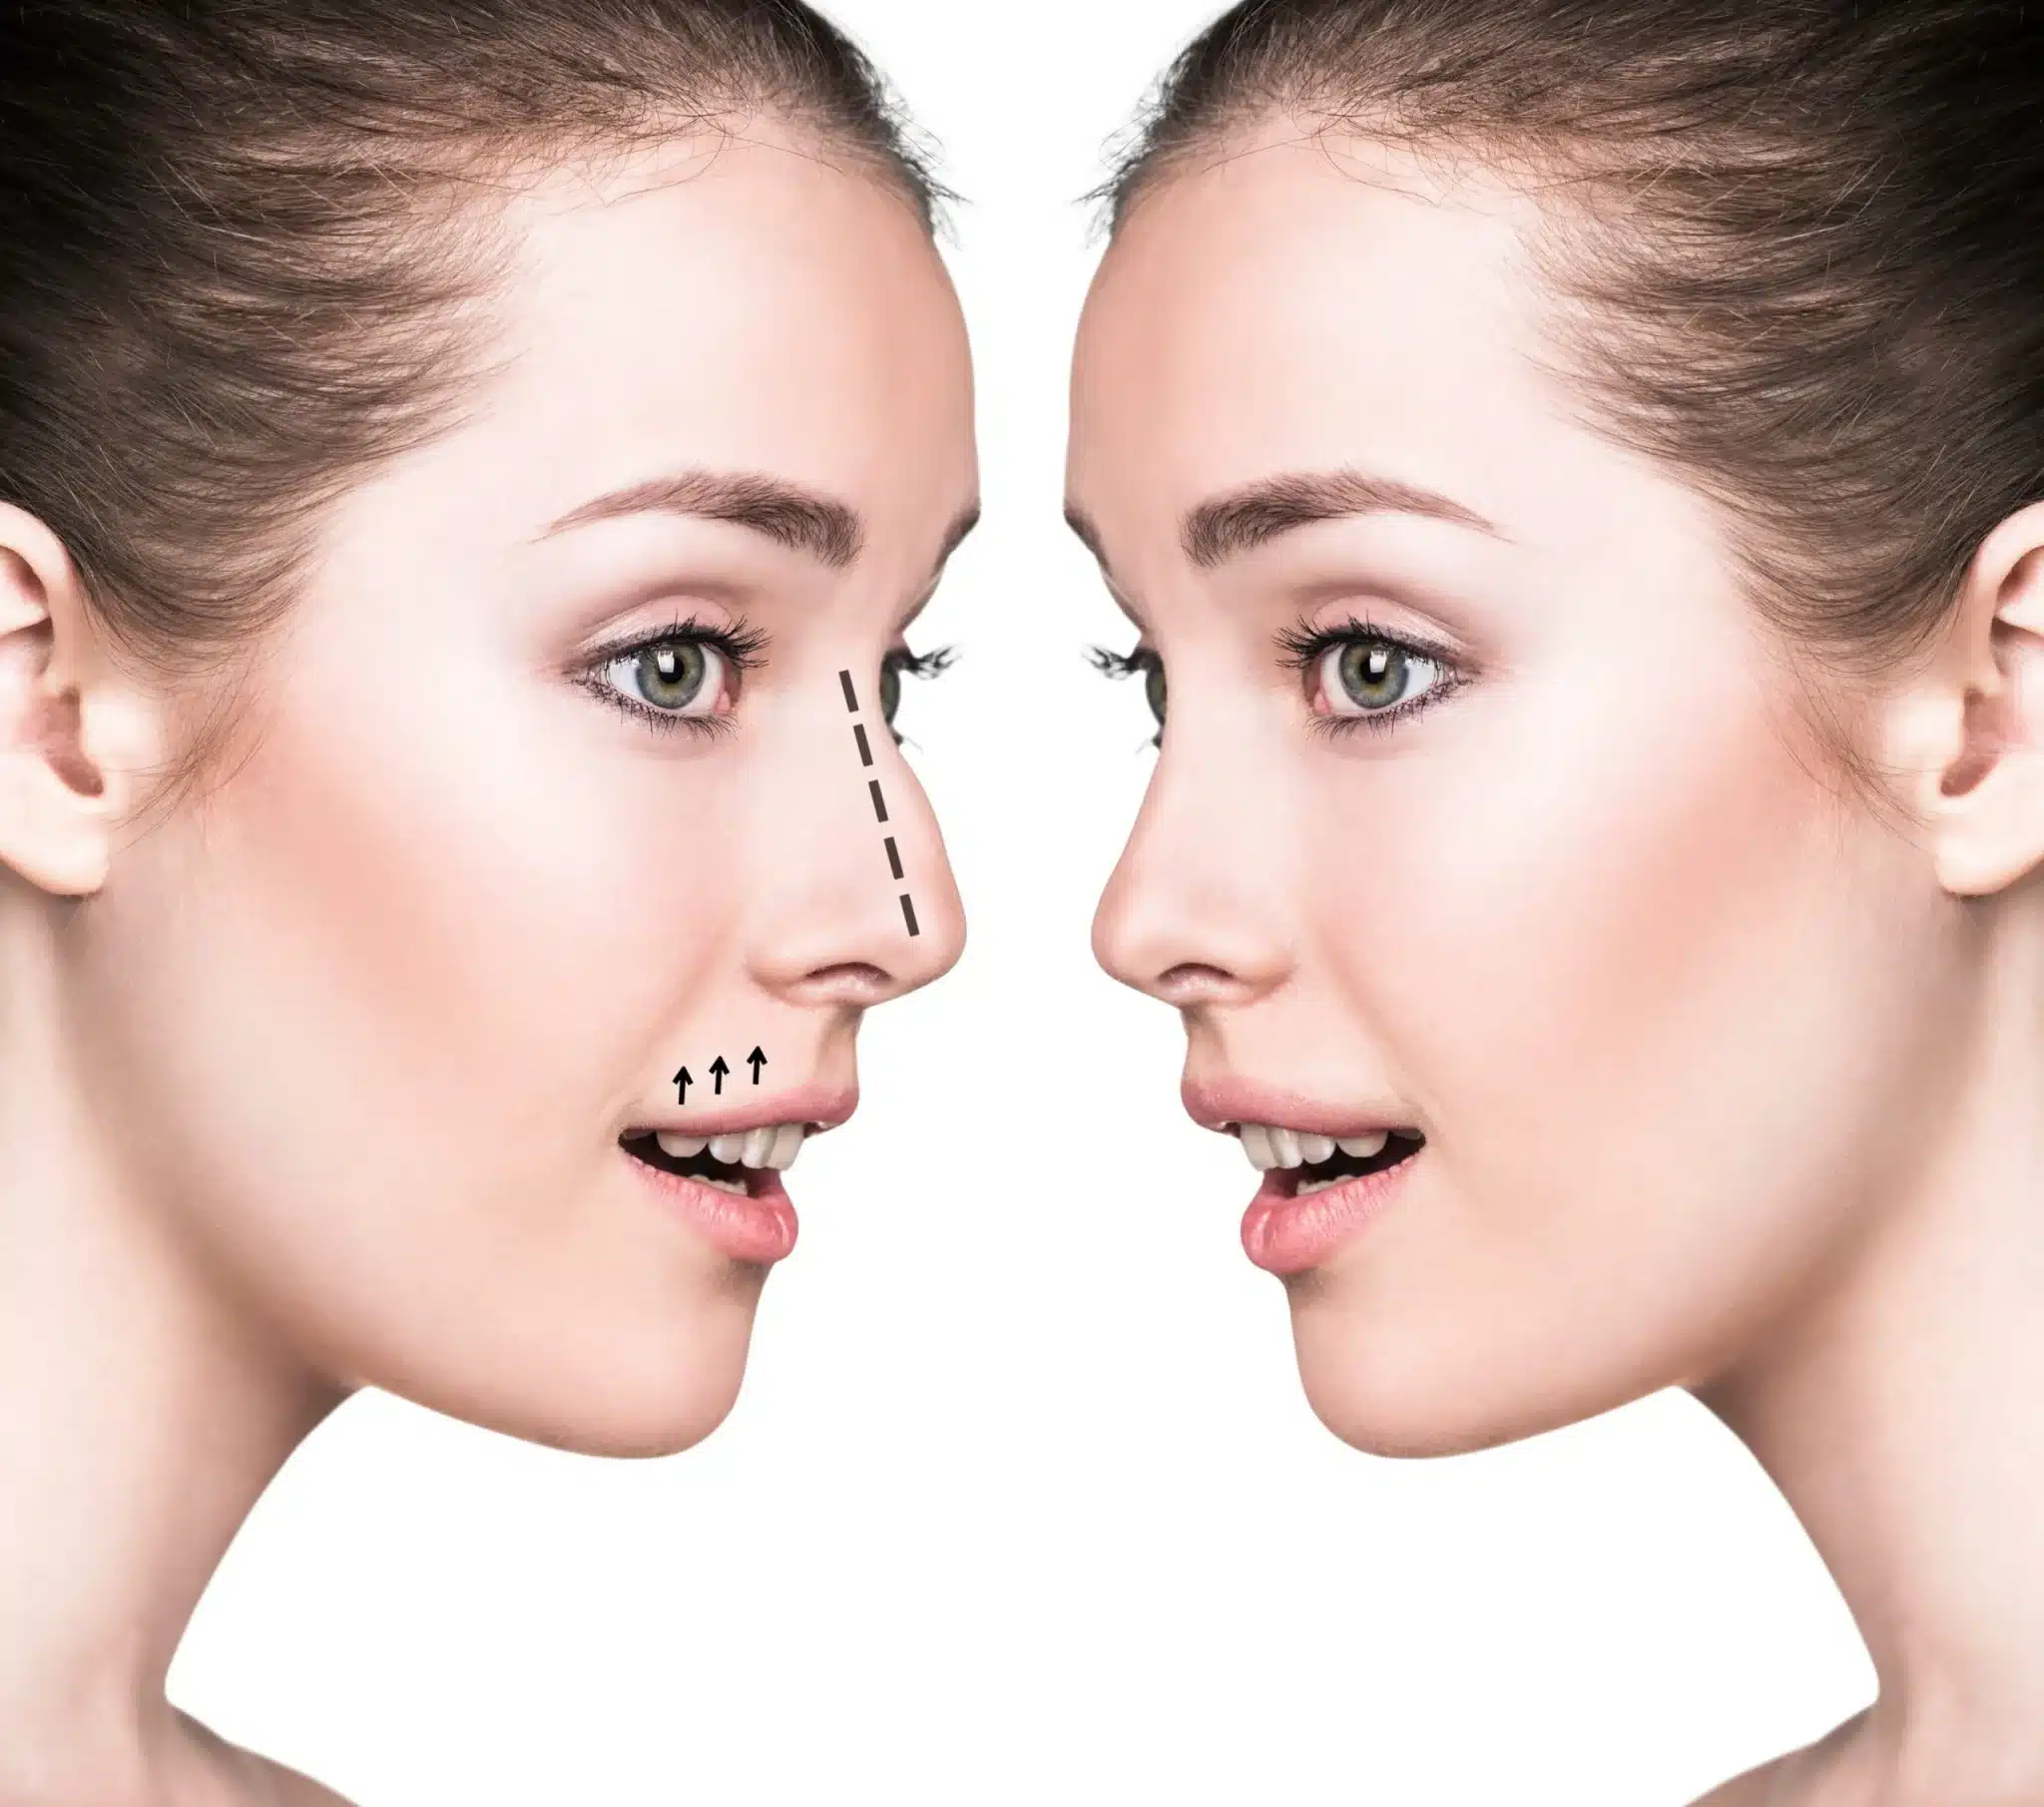 Another consideration with rhinoplasty is the recovery process, which can vary depending on the extent of the procedure and individual healing factors.